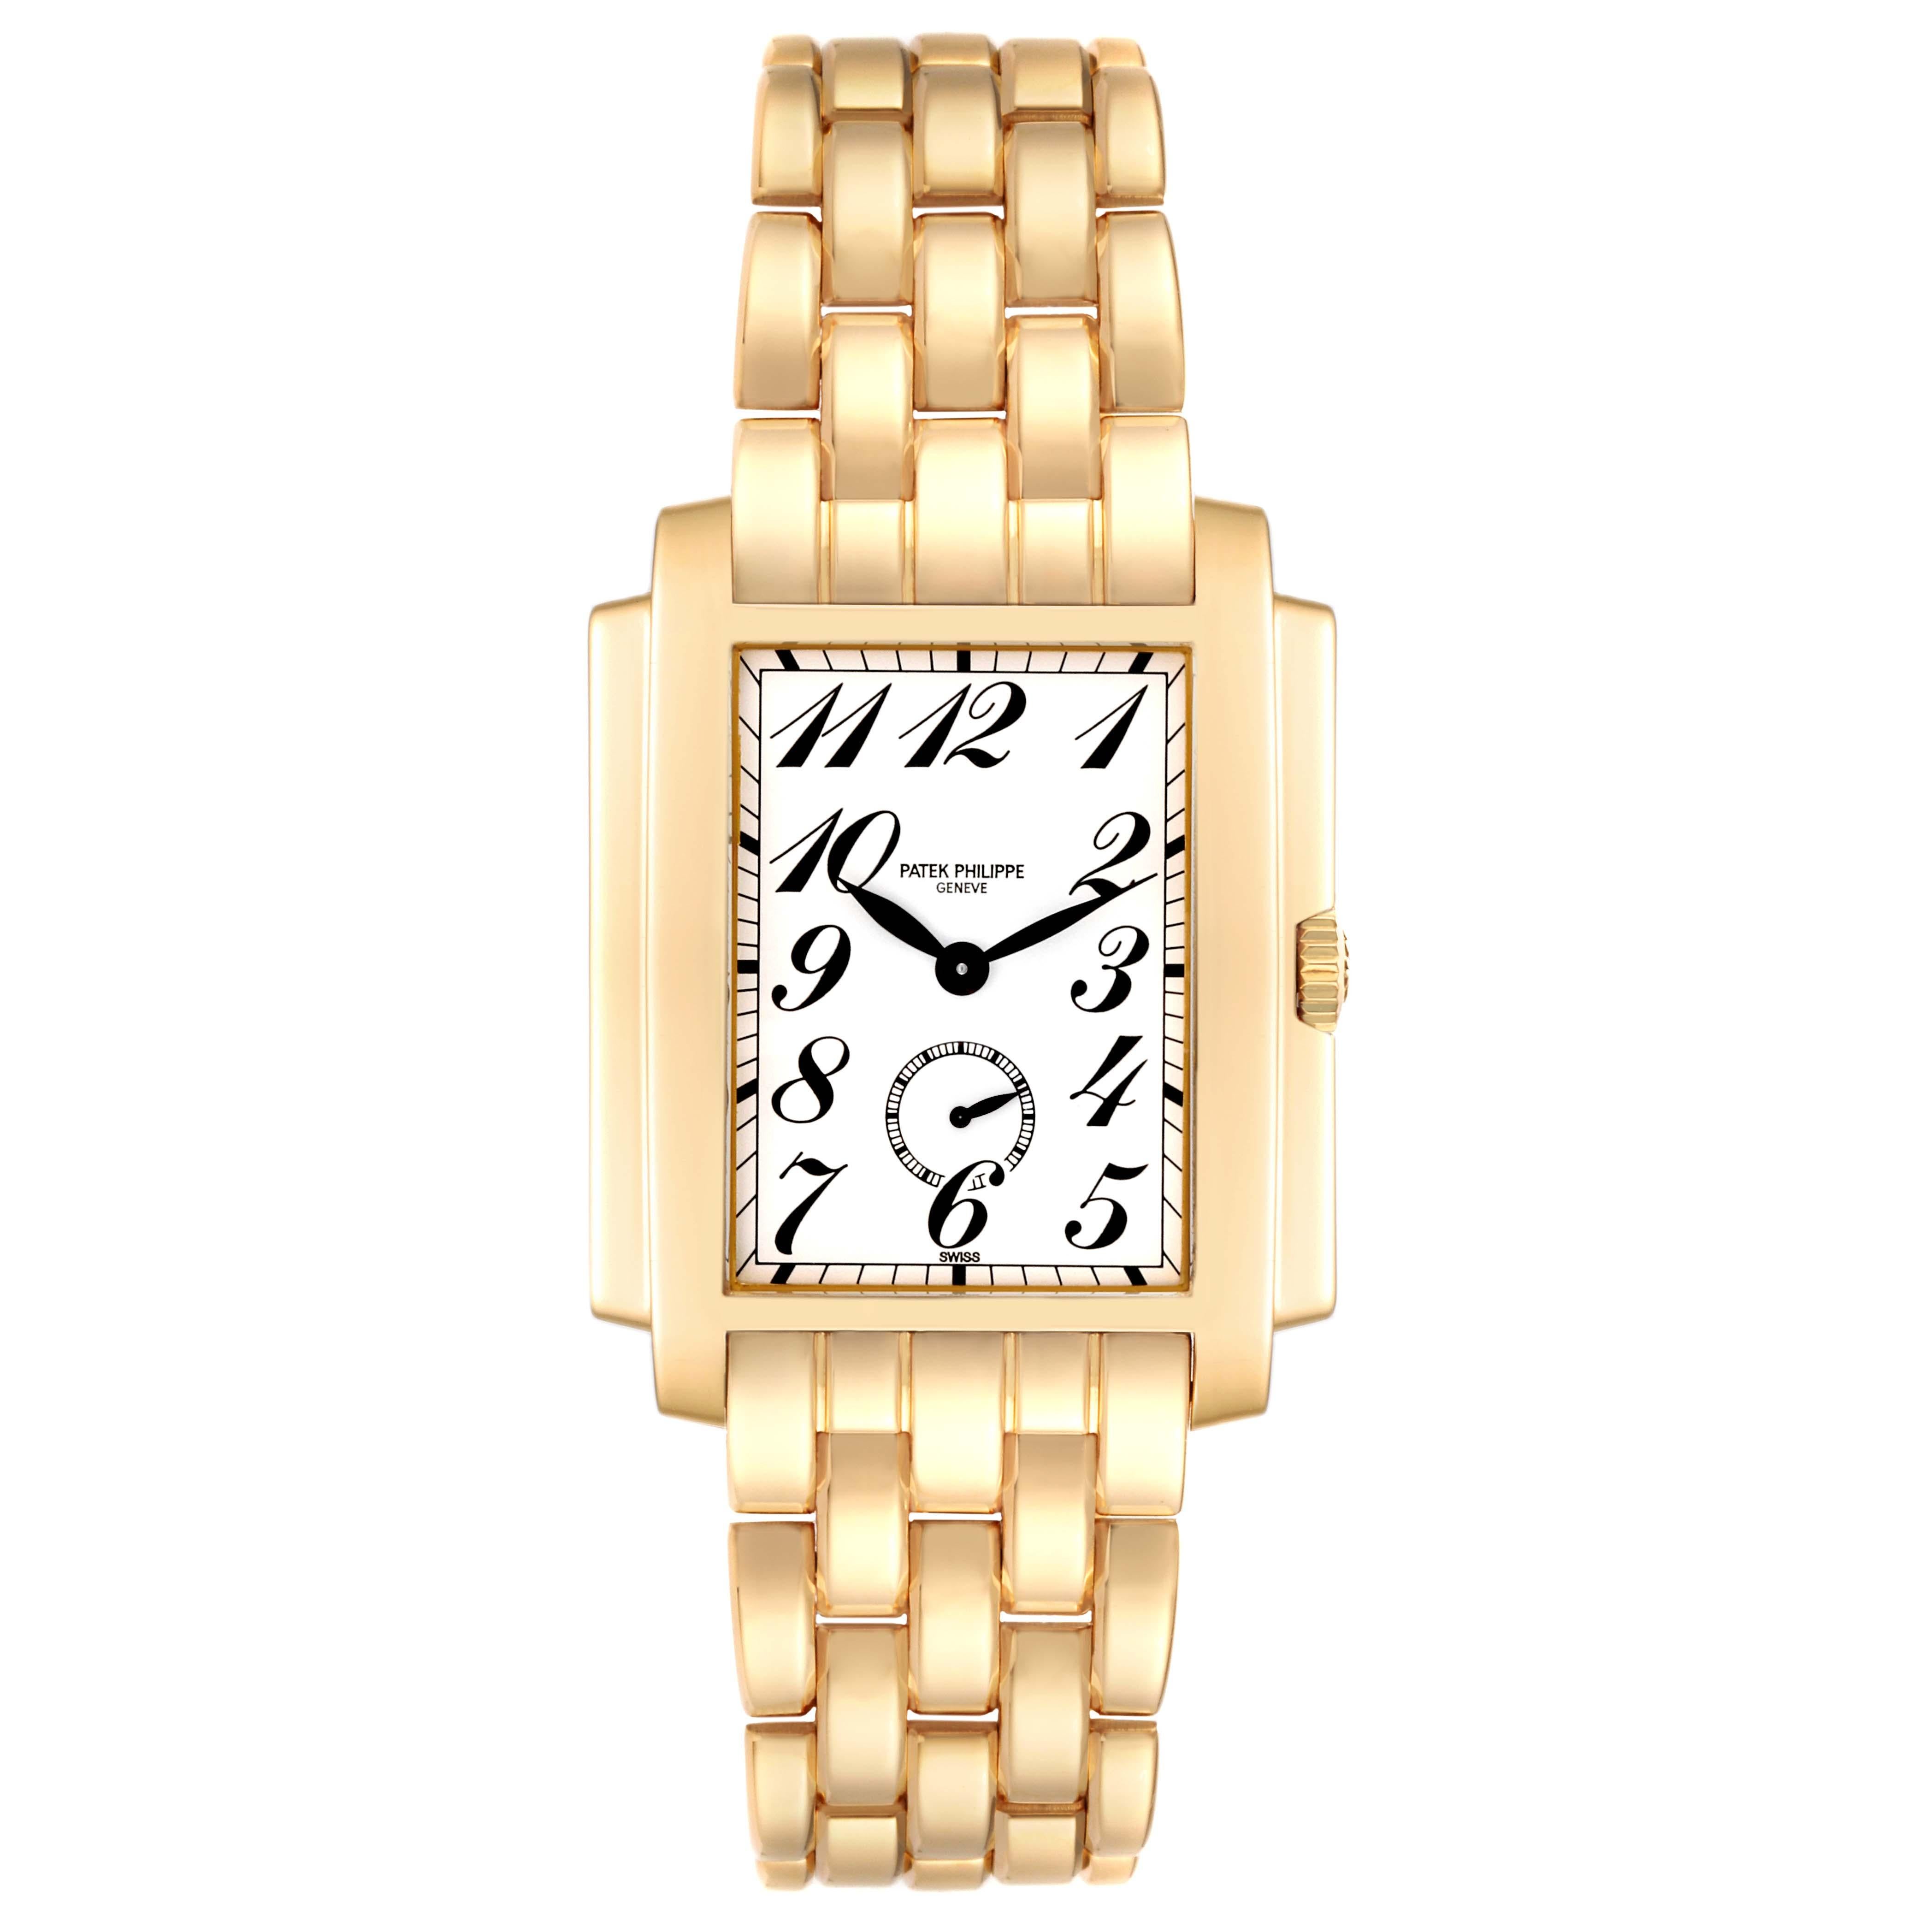 Patek Philippe Gondolo Yellow Gold Small Seconds Mens Watch 5024 Box Papers. Manual winding movement. 18K yellow gold rectangular case 30mm x 38mm mm. . Scratch resistant sapphire crystal. Silver dial with black Arabic numerals. Small seconds